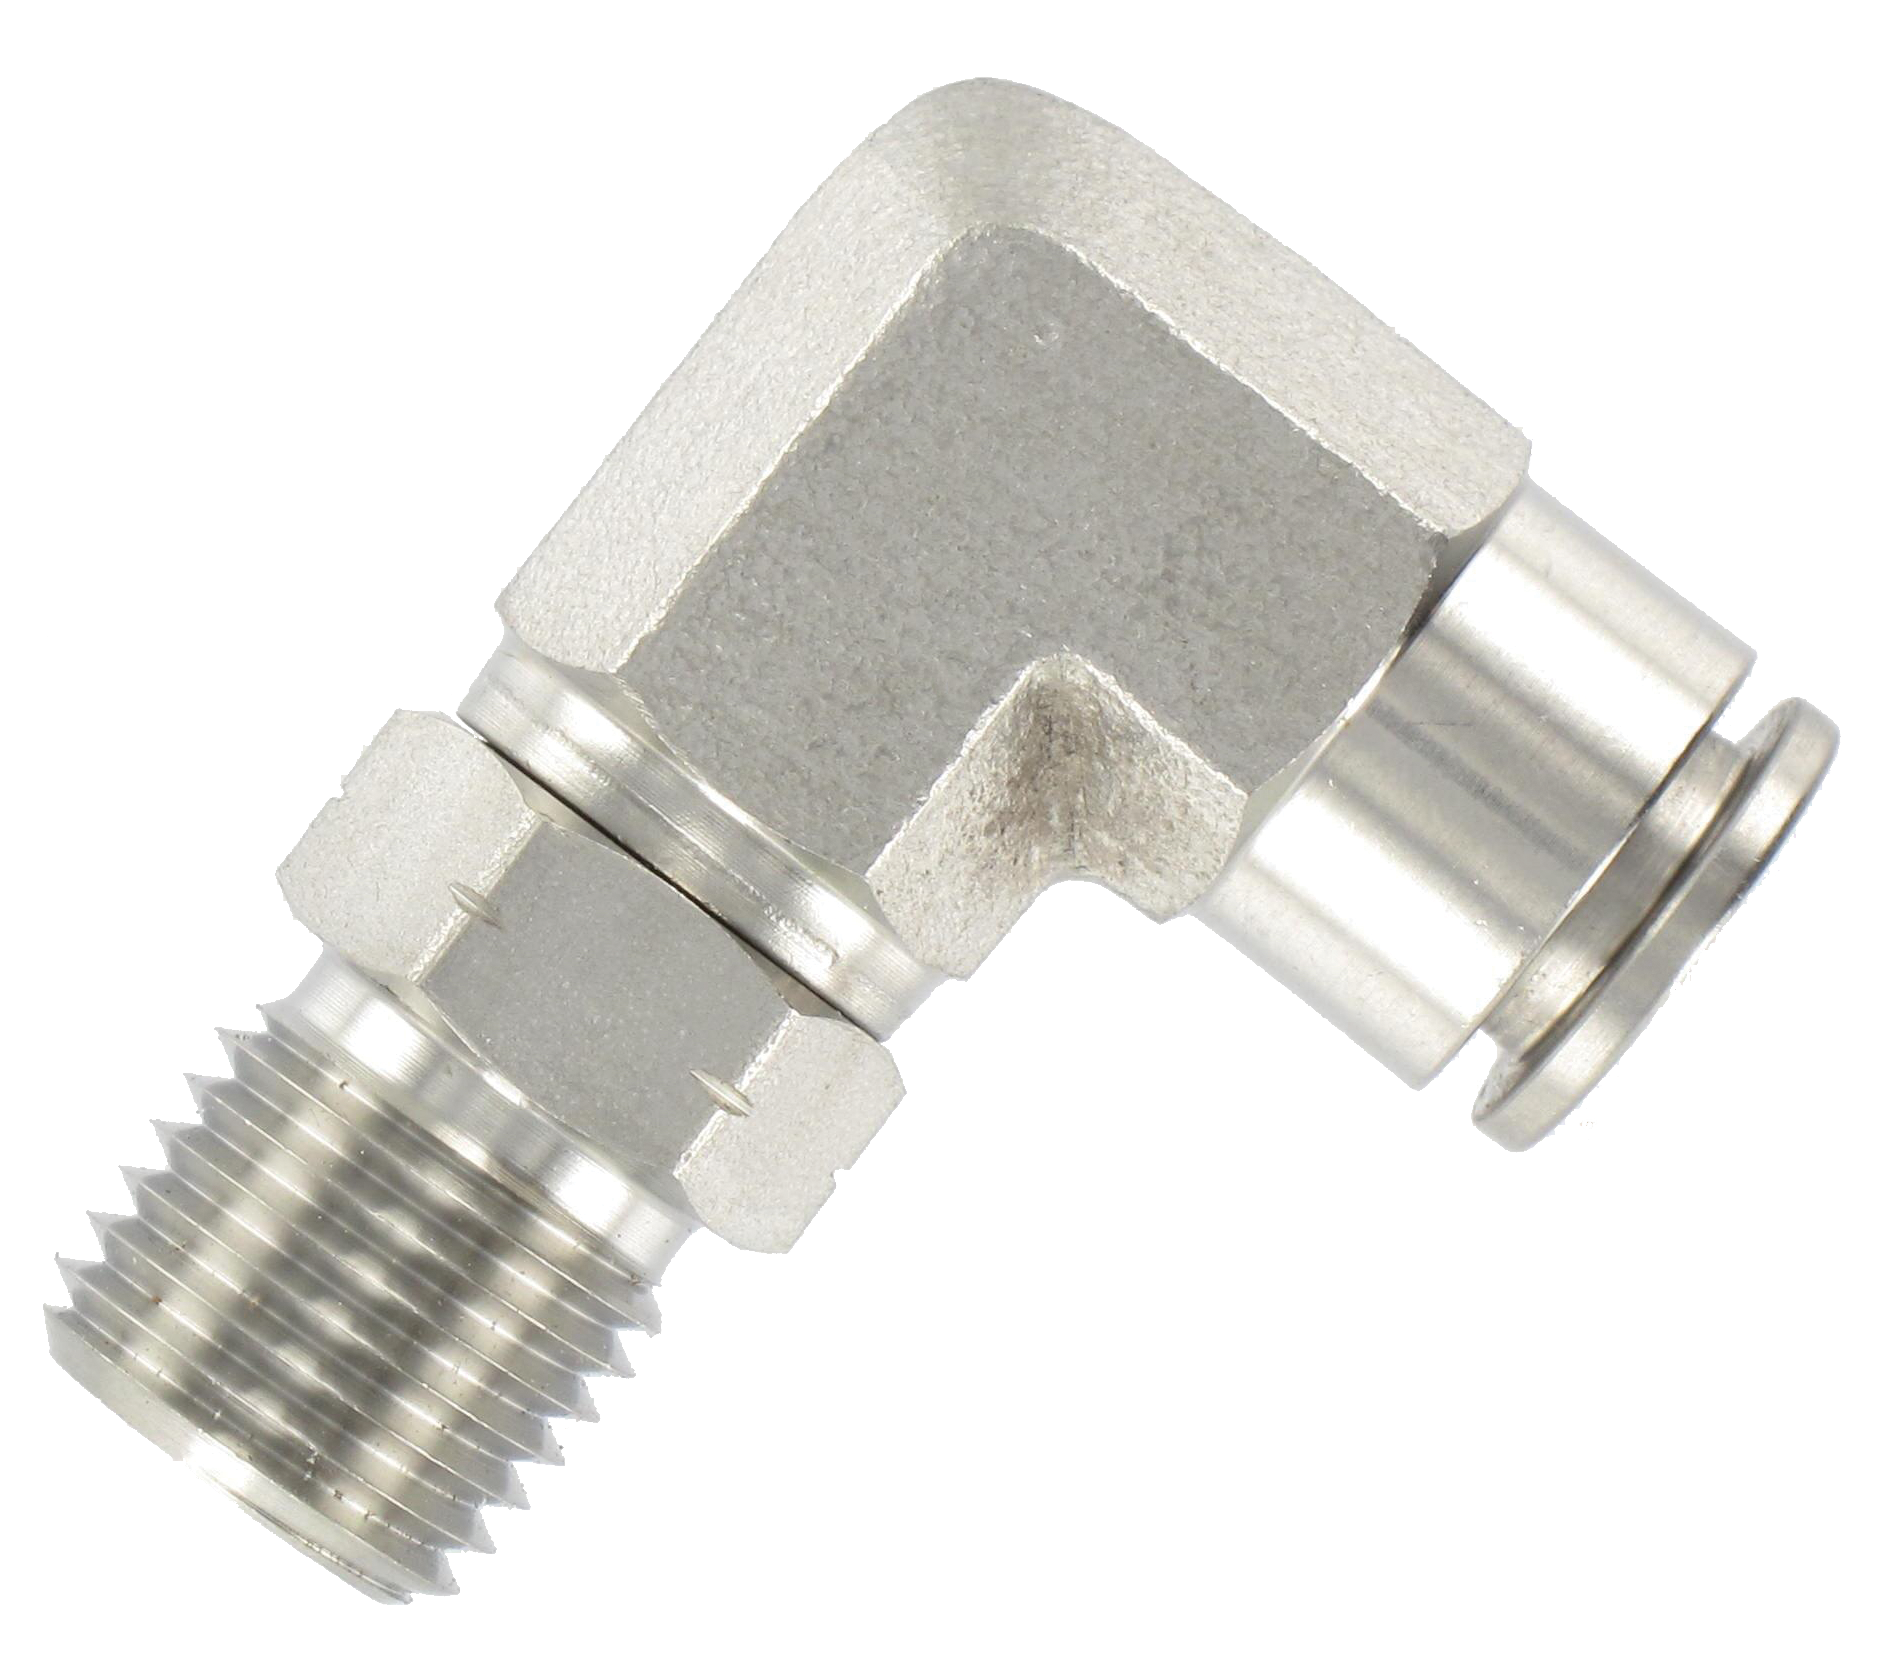 T6 - 1/8\" NPT male swivel stainless steel 316 elbow push-in fittings Pneumatic function fittings